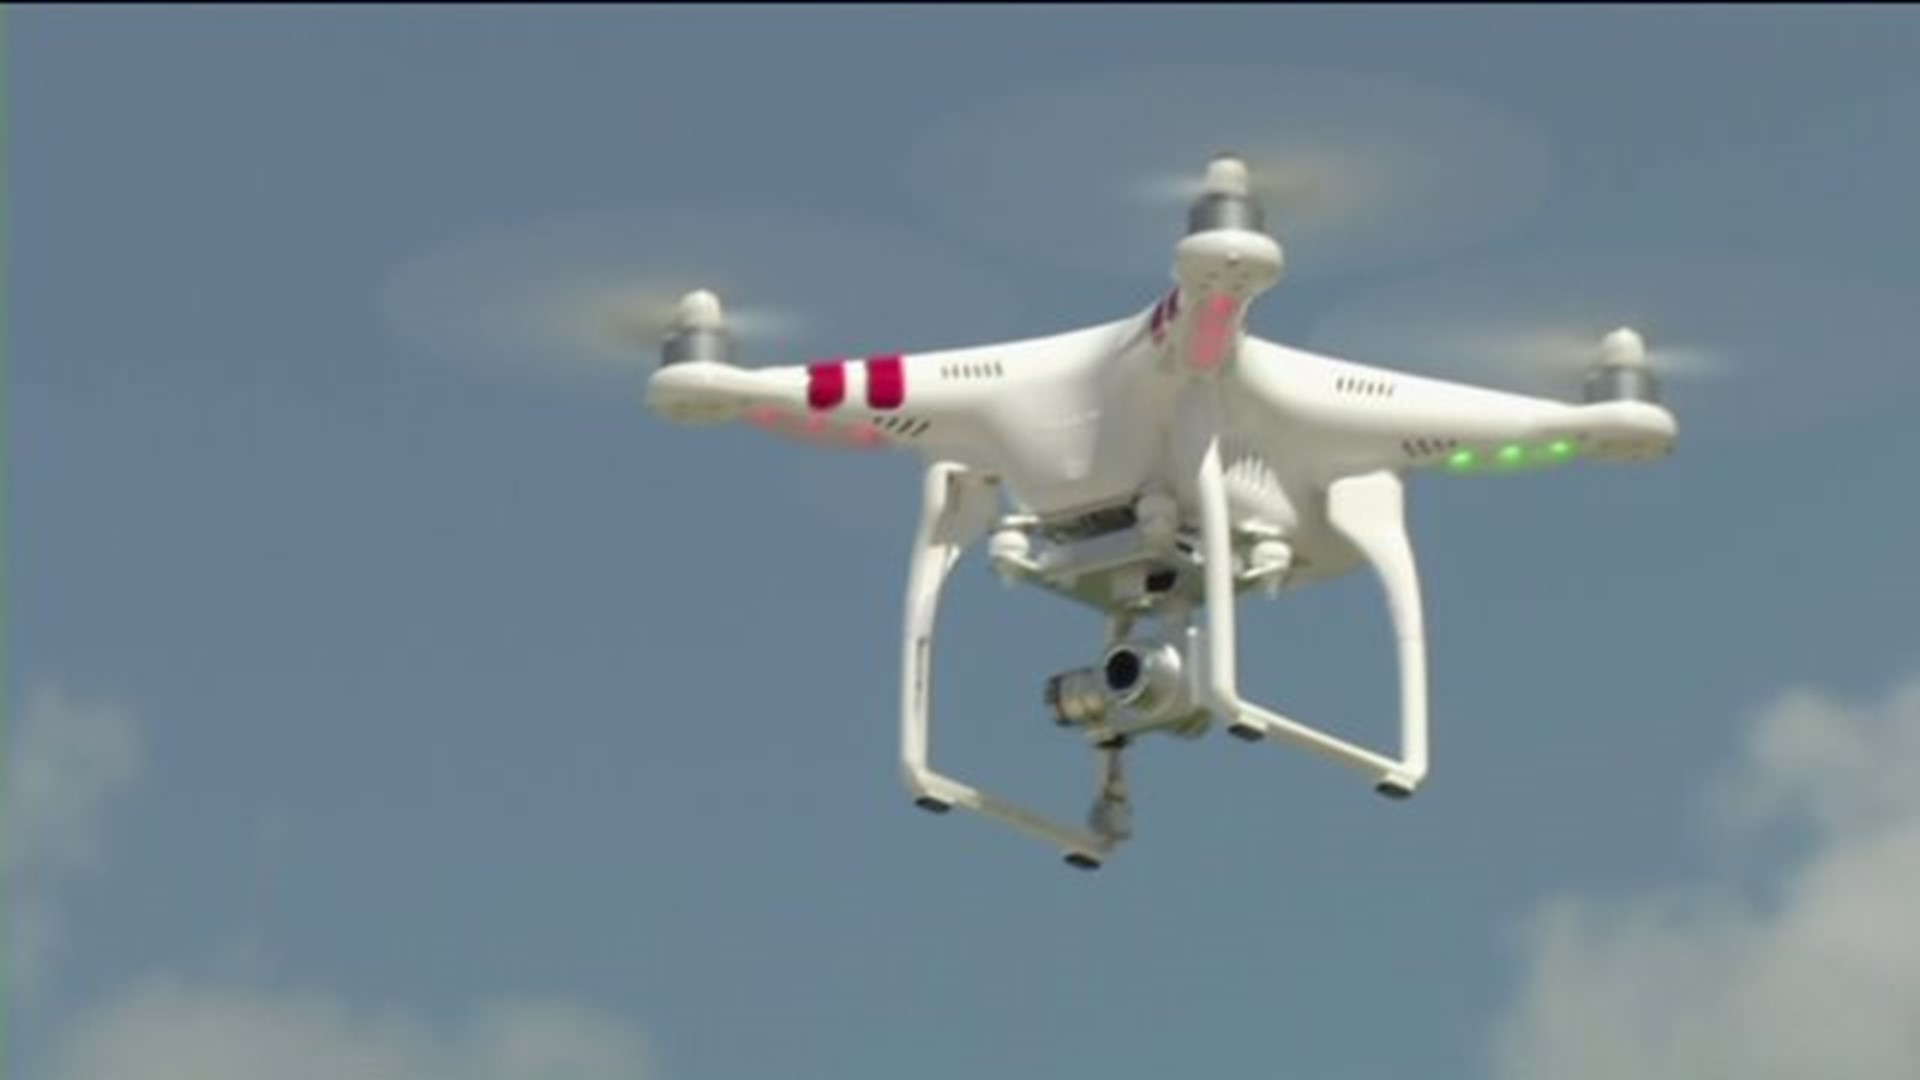 The Real Story: Will the state outlaw weaponized drones?